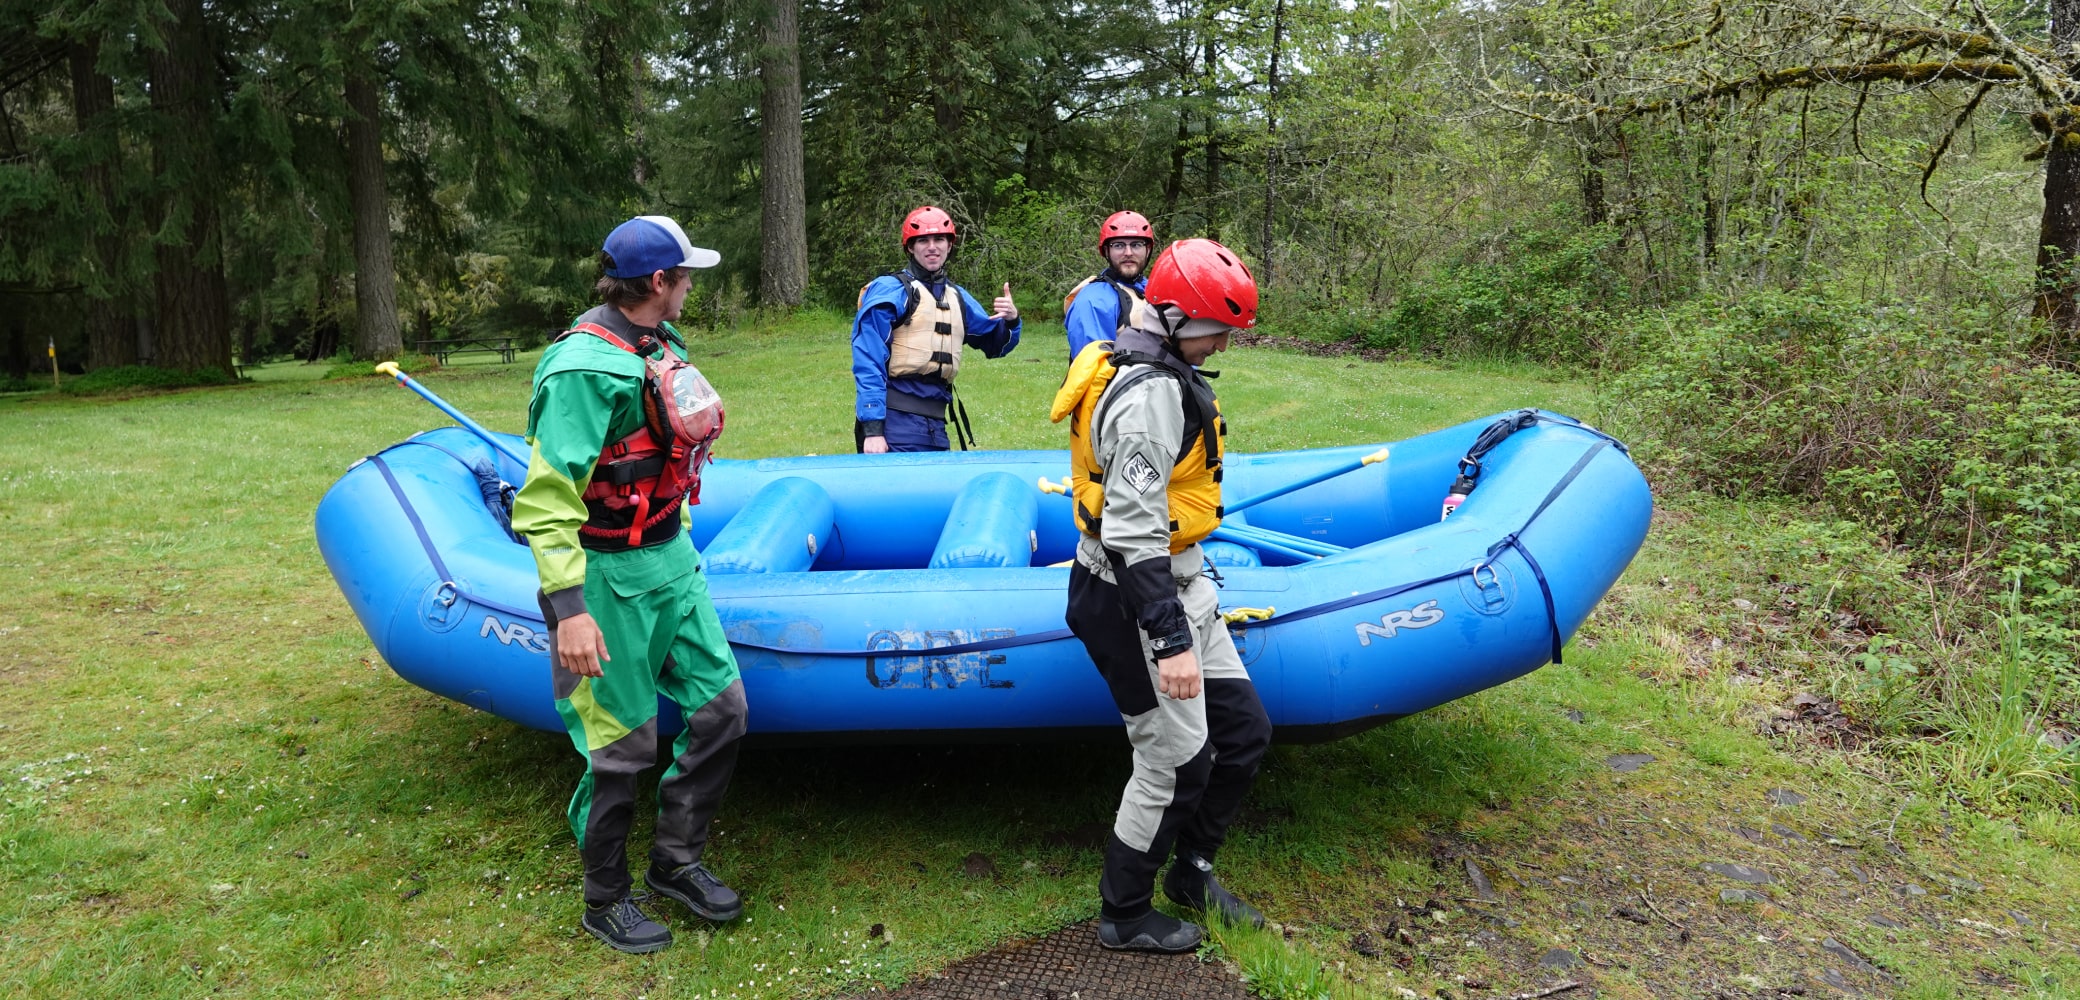 A group of white water rafters carry a blue raft toward the river while in full gear.